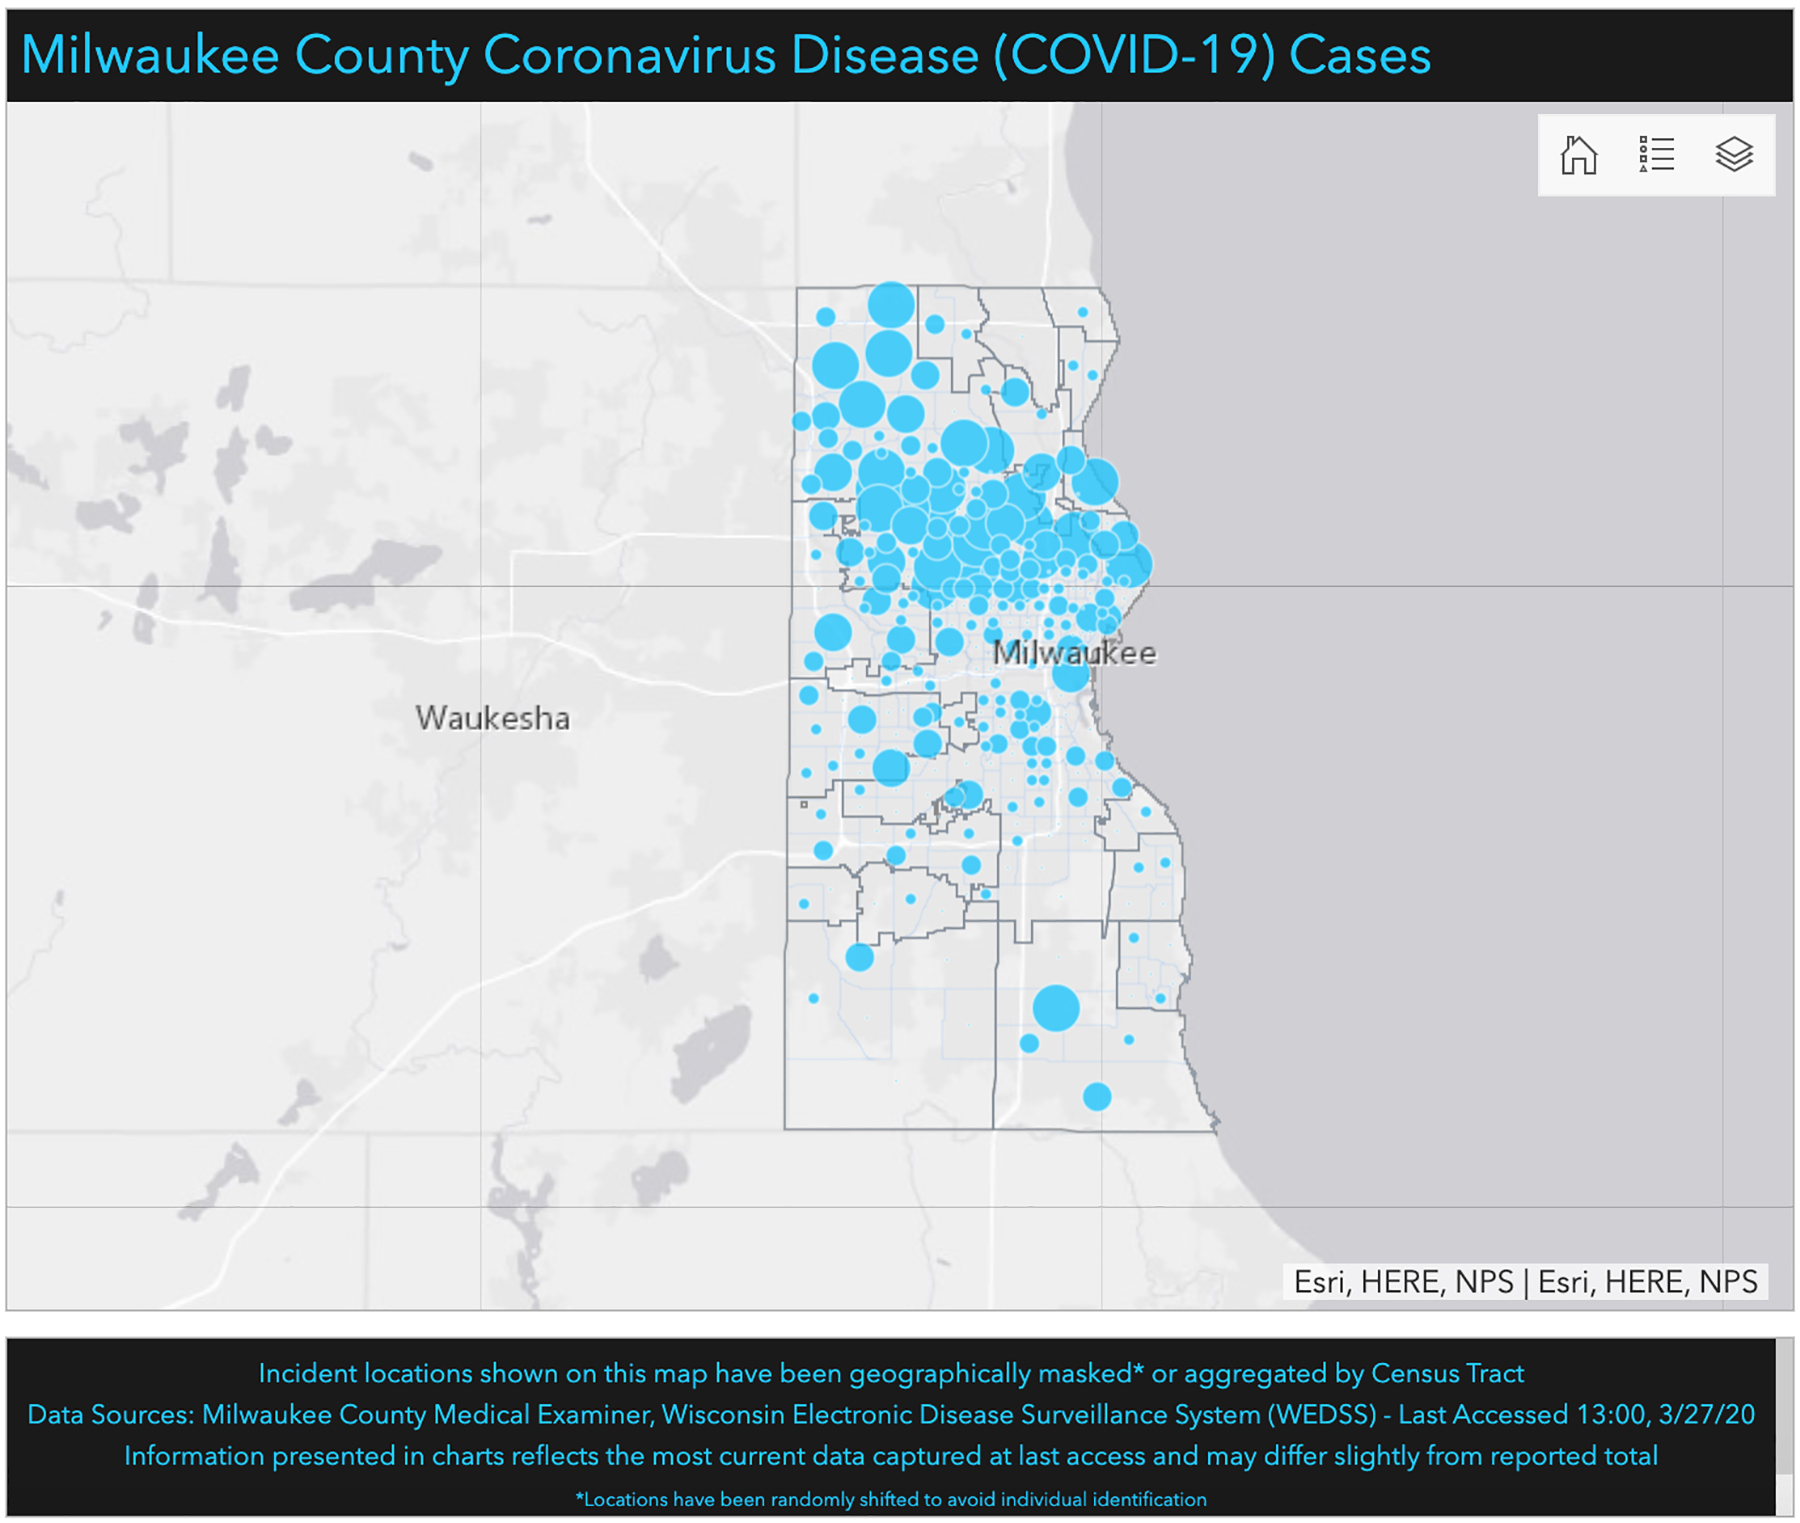 Milwaukee County COVID-19 cases map